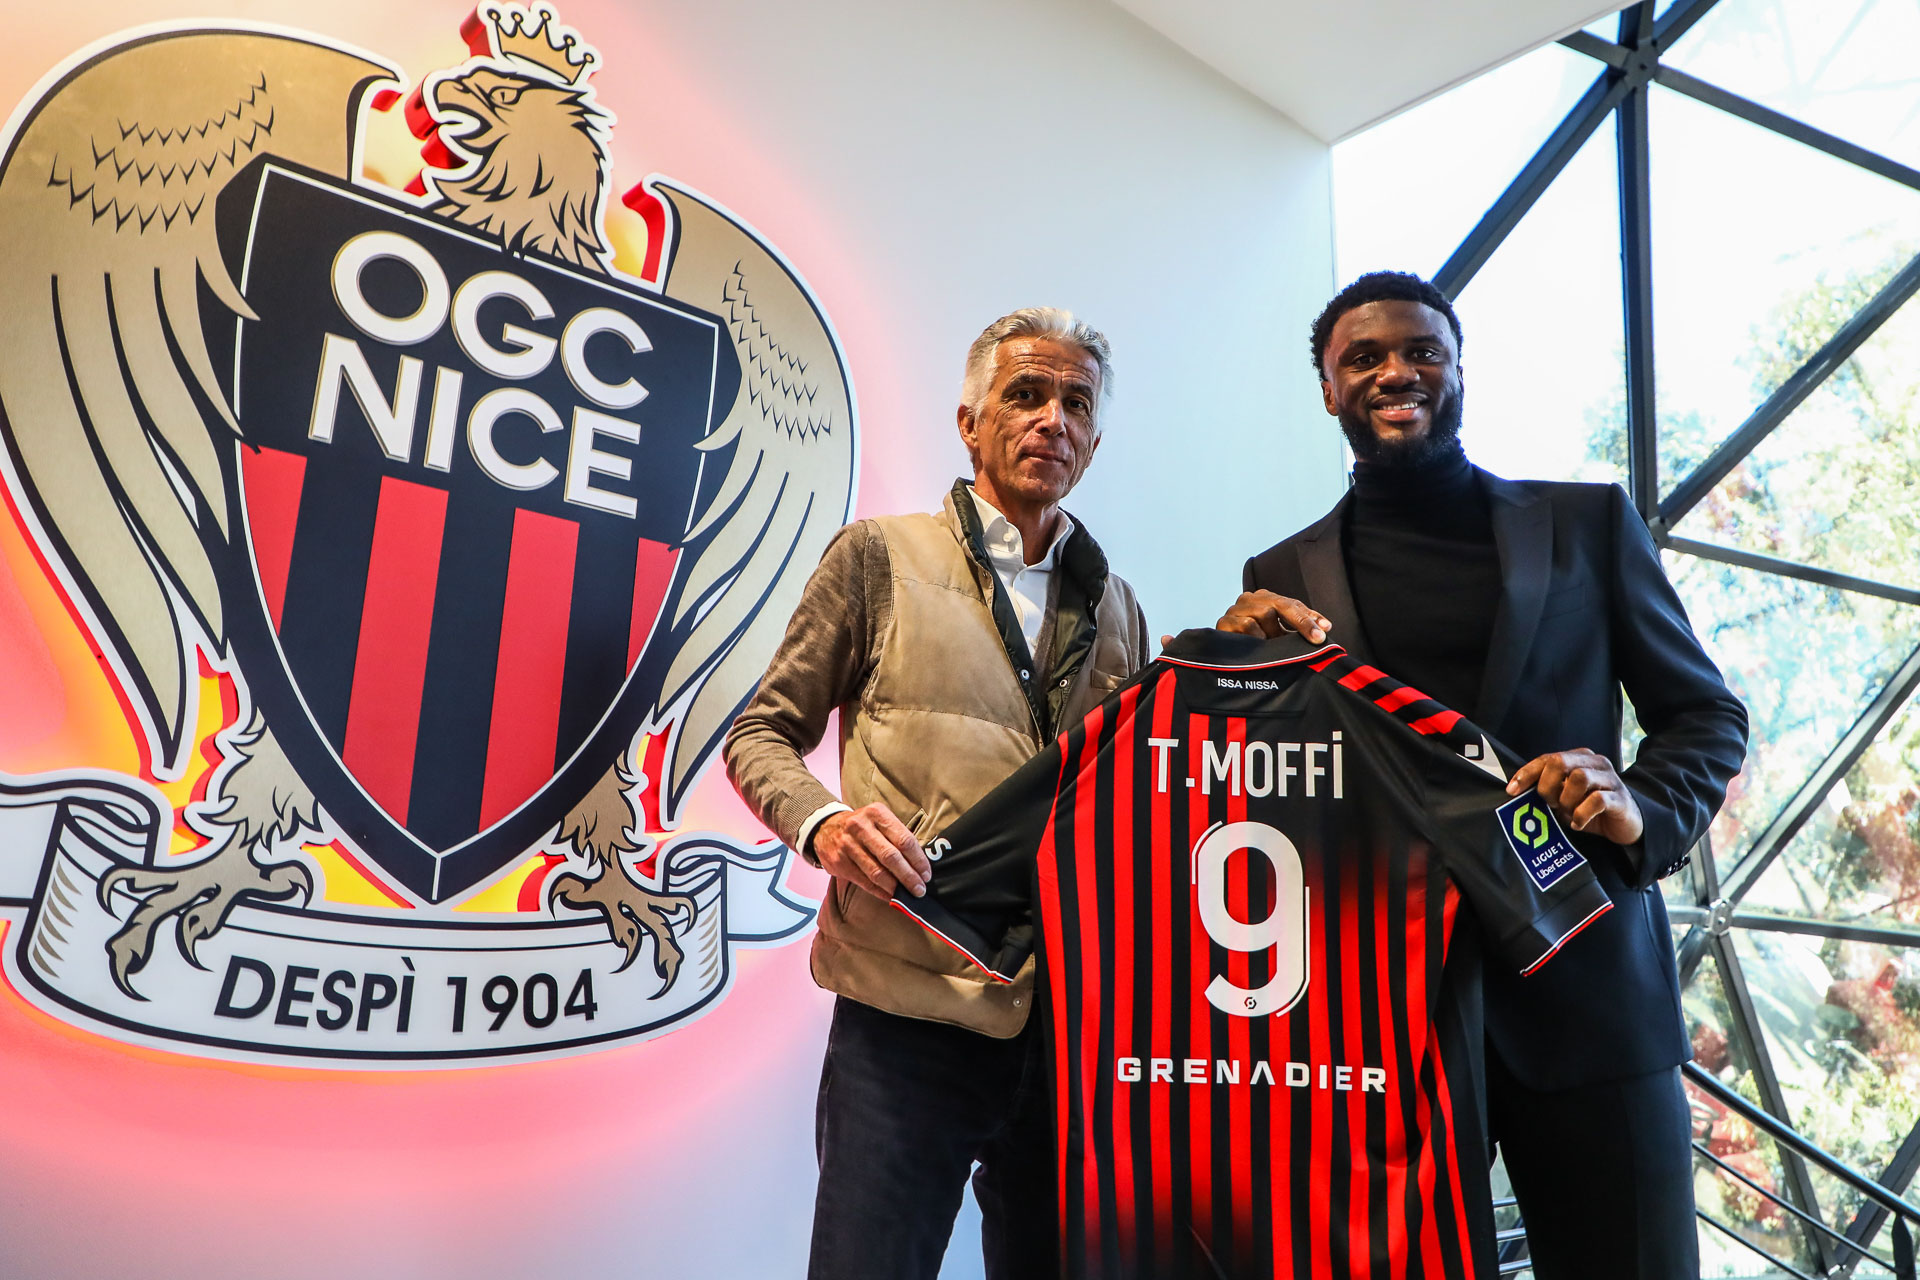 Pulse Sports Nigeria on Twitter: "🚨 𝗗𝗢𝗡𝗘 𝗗𝗘𝗔𝗟: Super Eagles forward Terem Moffi has joined OGC Nice from Lorient in a €30m deal. 💰 Moffi will join Nice on an initial loan